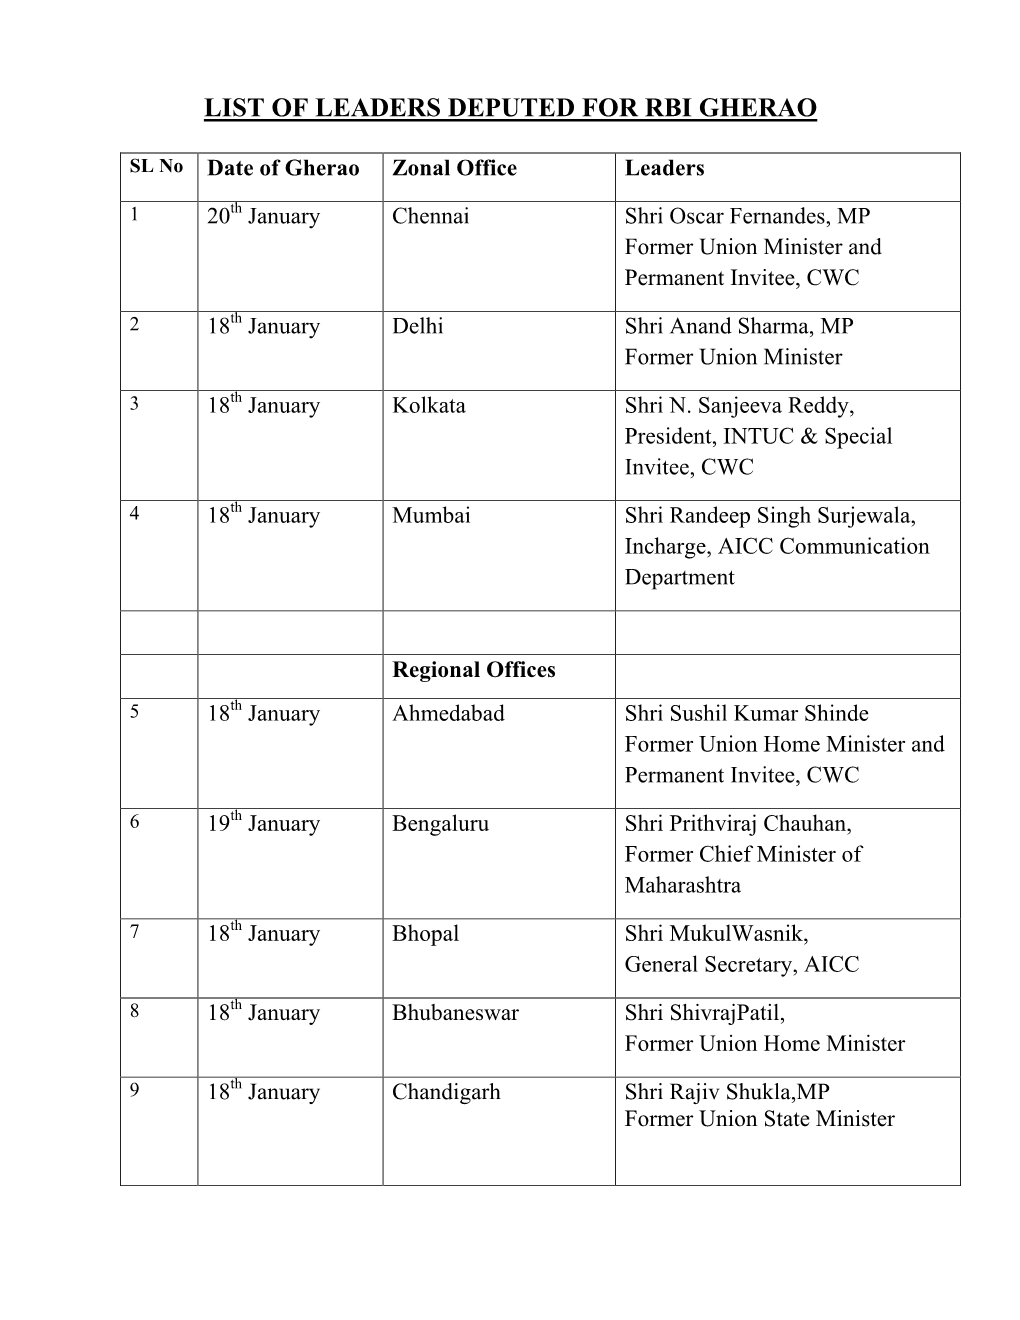 List of Leaders Deputed for Rbi Gherao